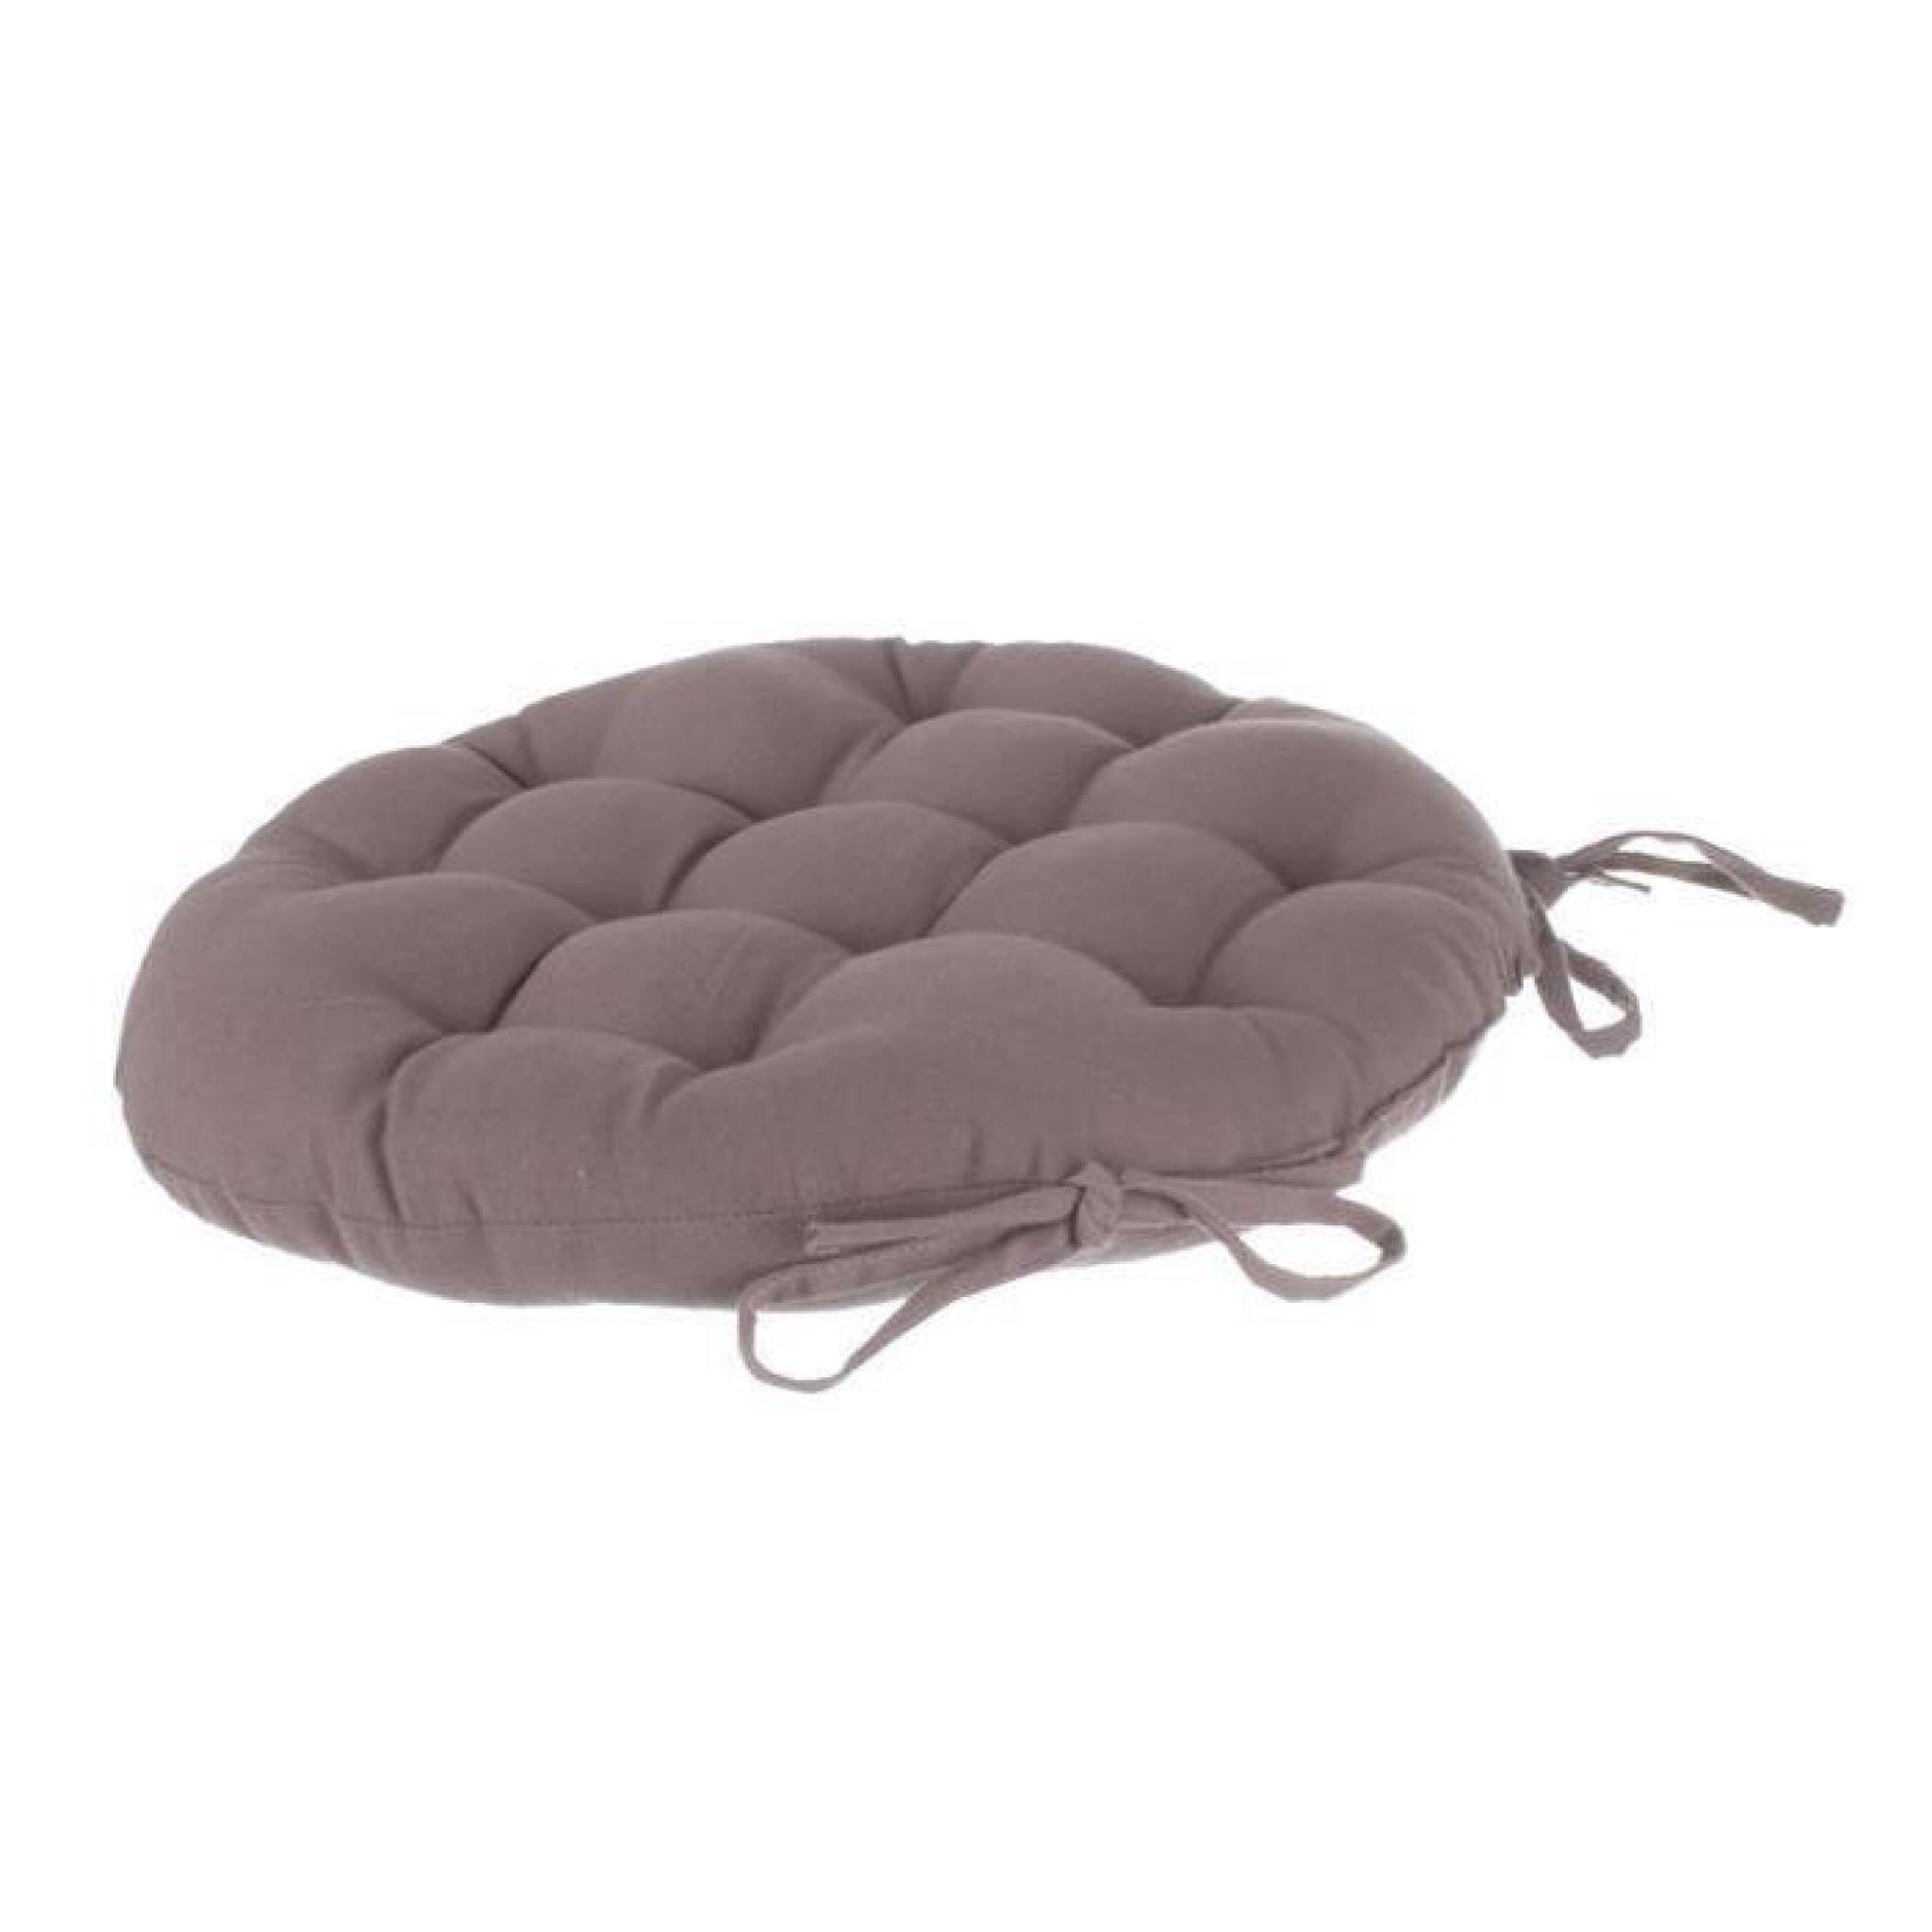 Coussin de chaise ronde Lina Taupe pas cher